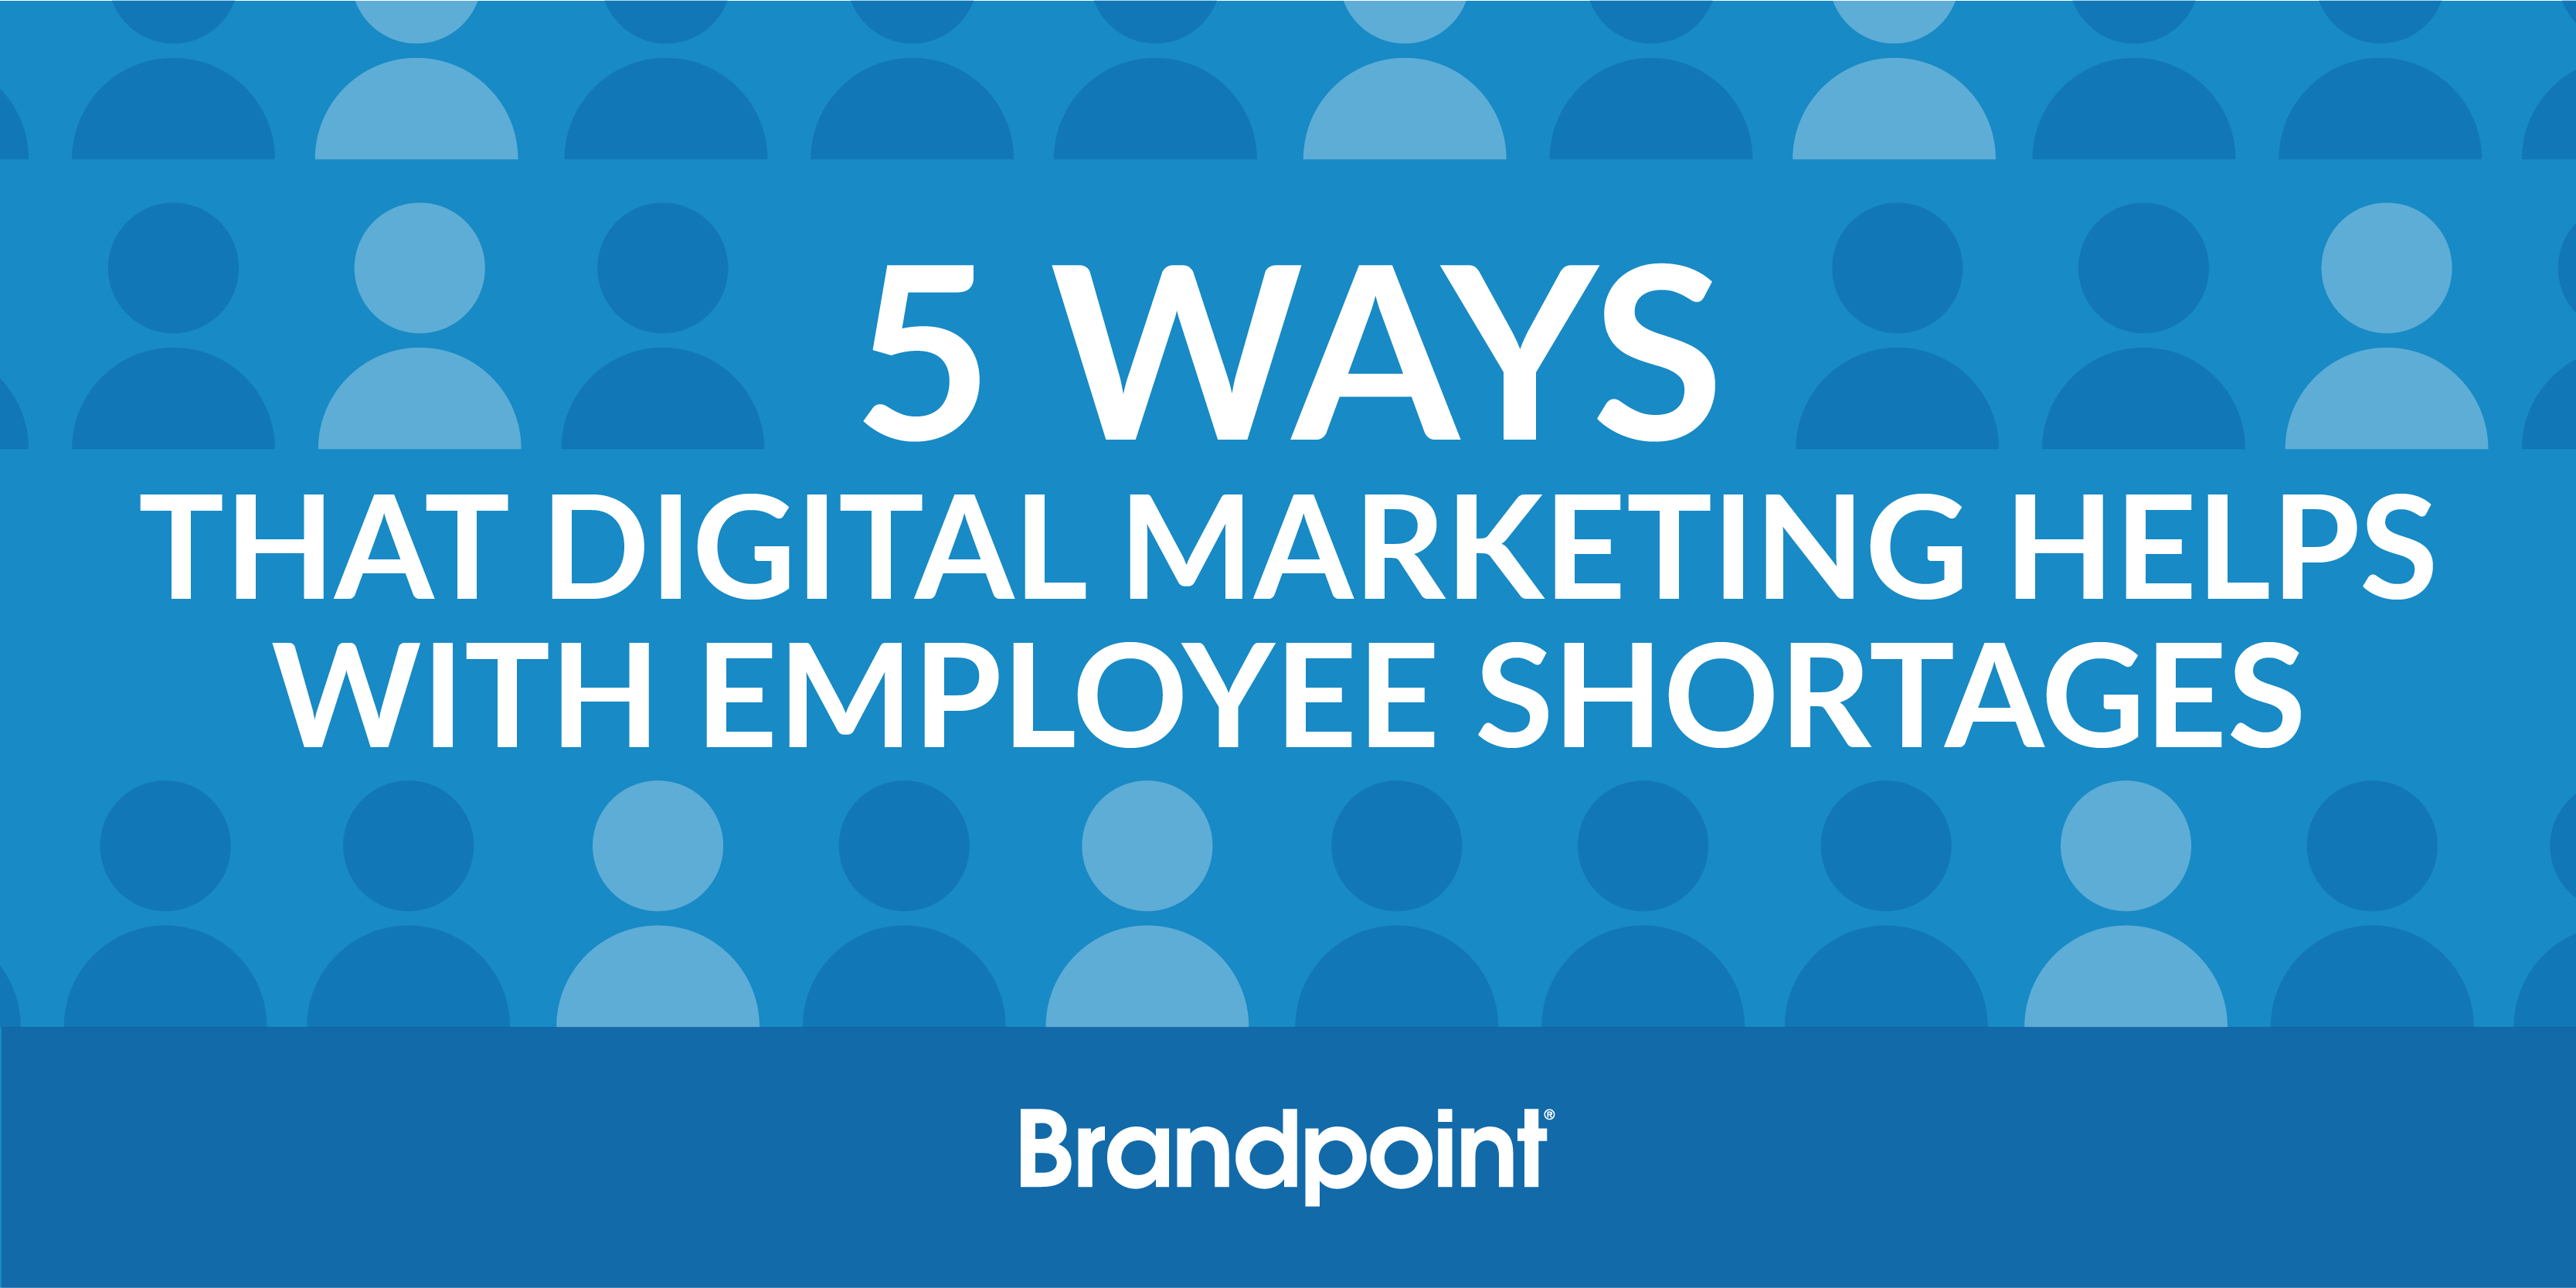 Digital Marketing and Employee Shortages